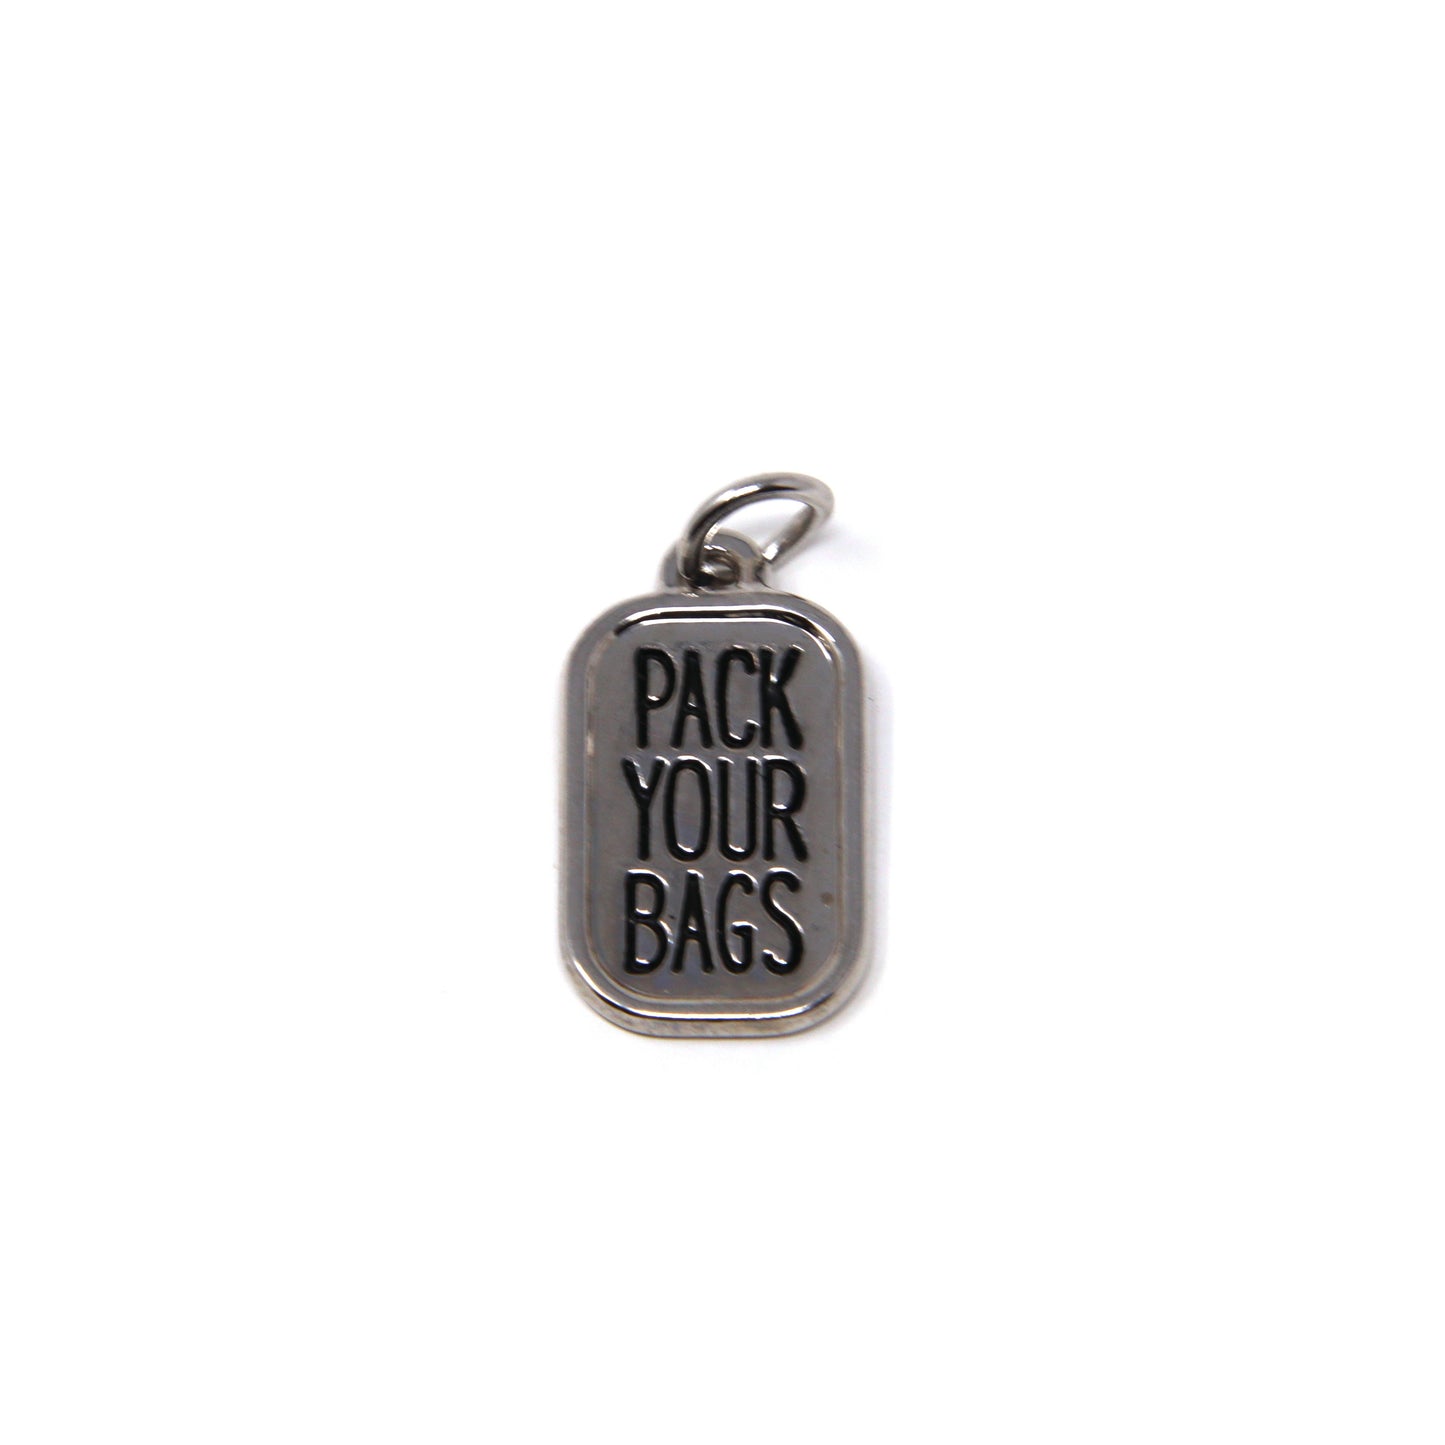 3/4 inch Nickel Finish Pack Your Bags Charm